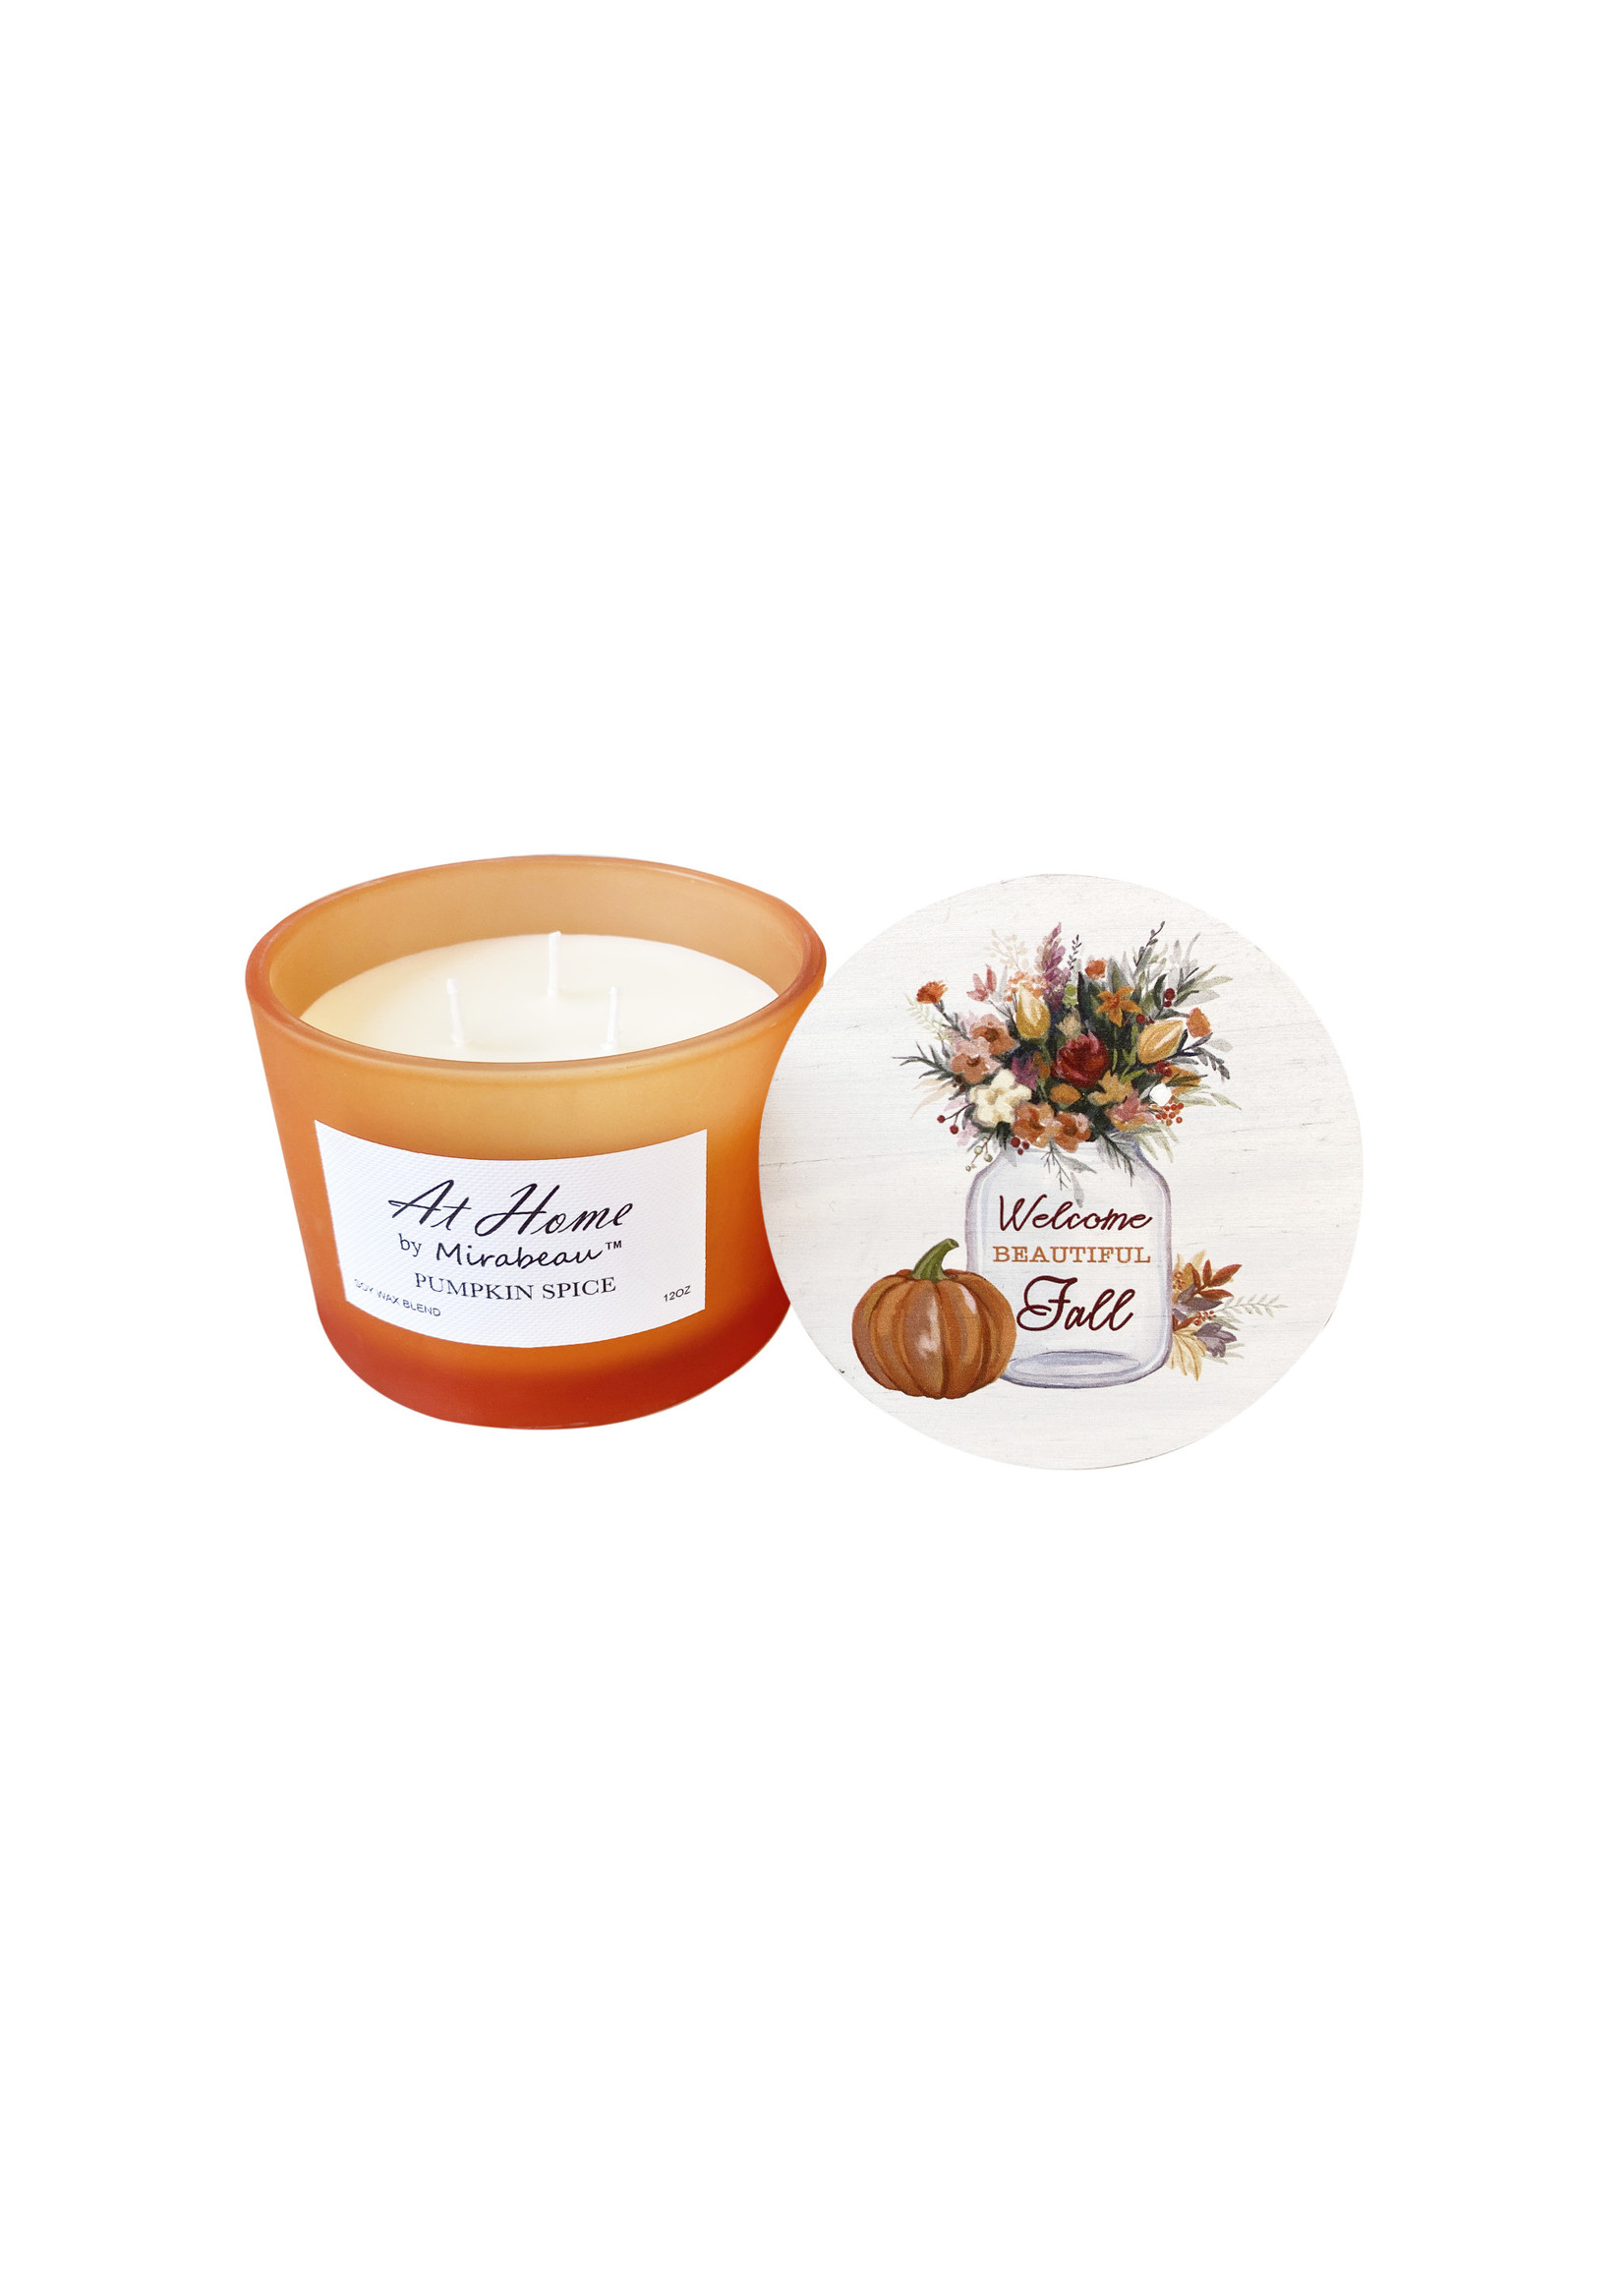 At Home by Mirabeau 12 oz Fall Candle